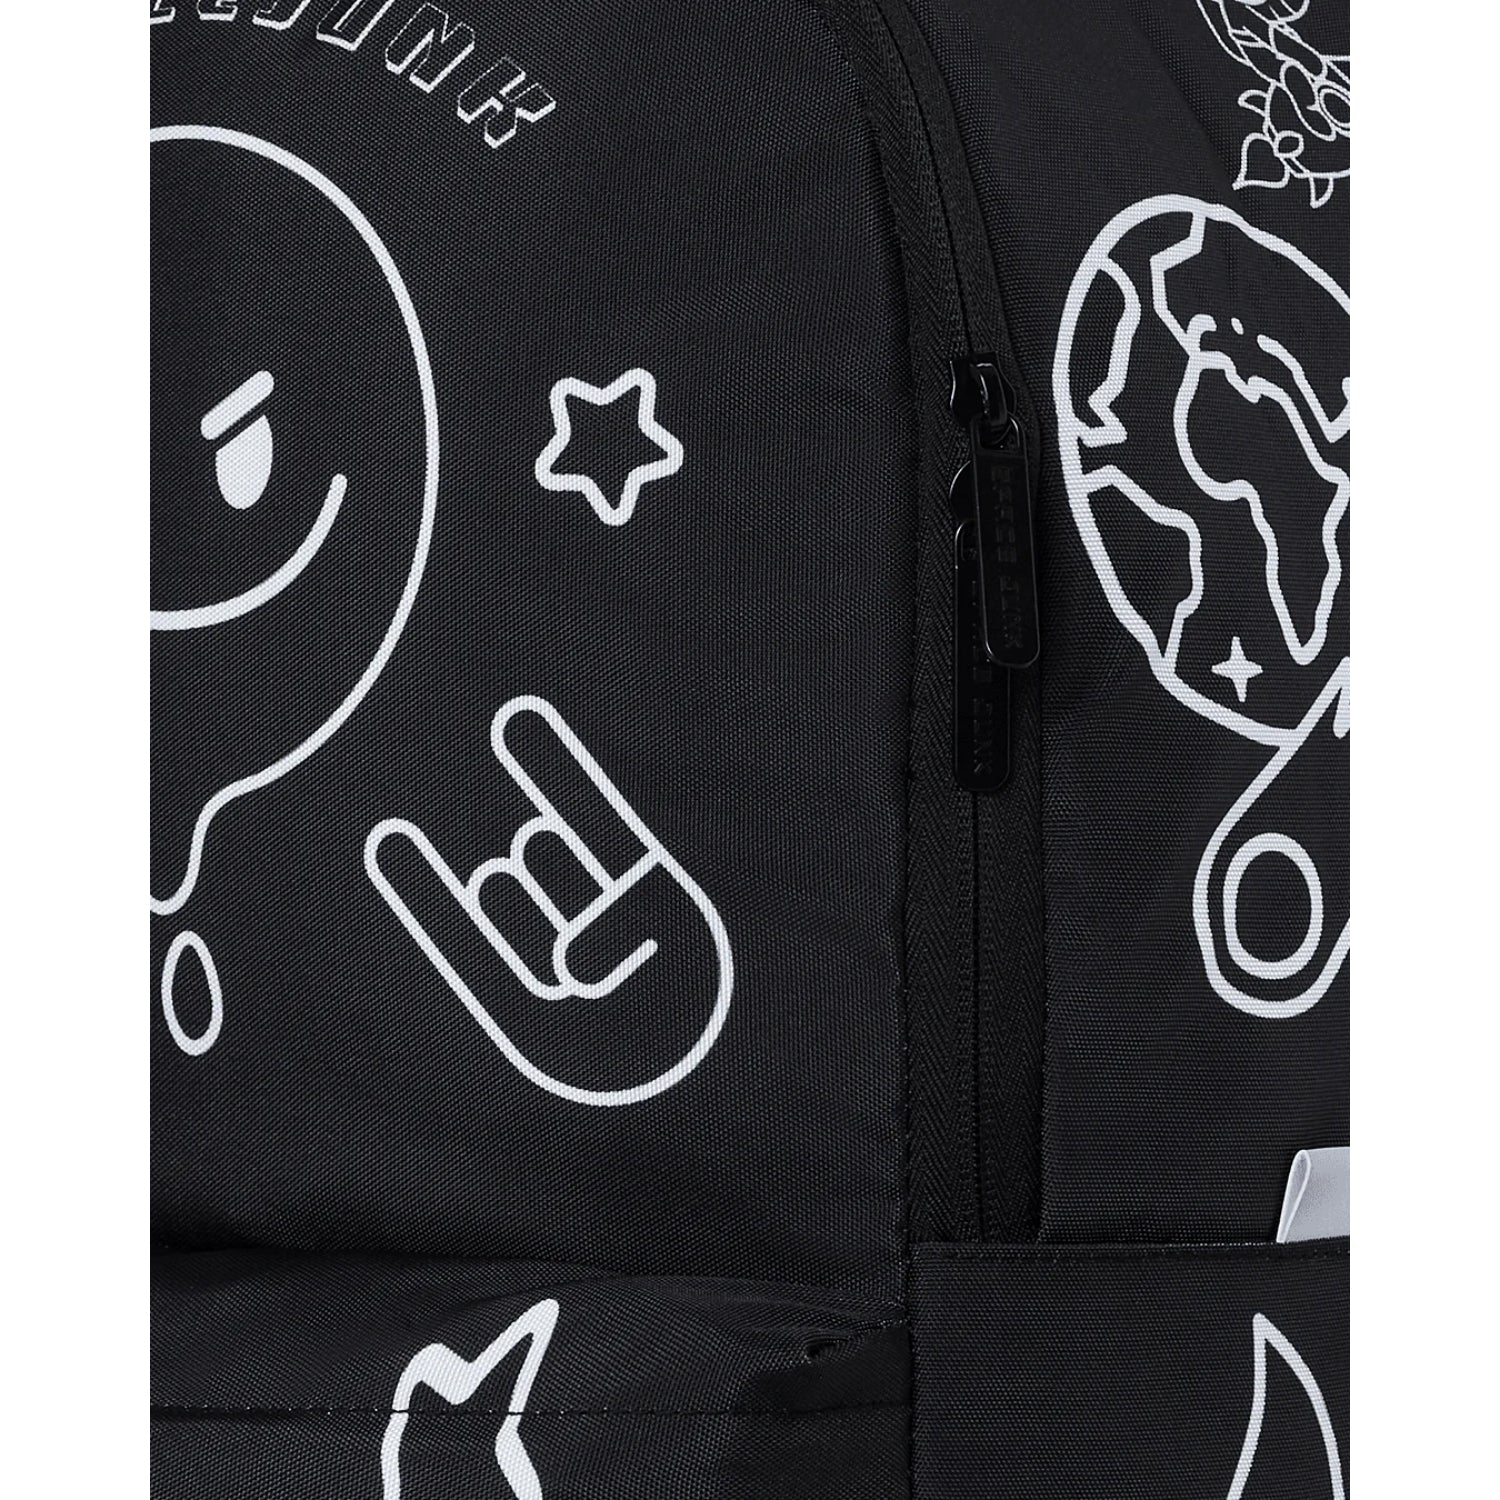 SPACE JUNK Iconic Full Size Backpack